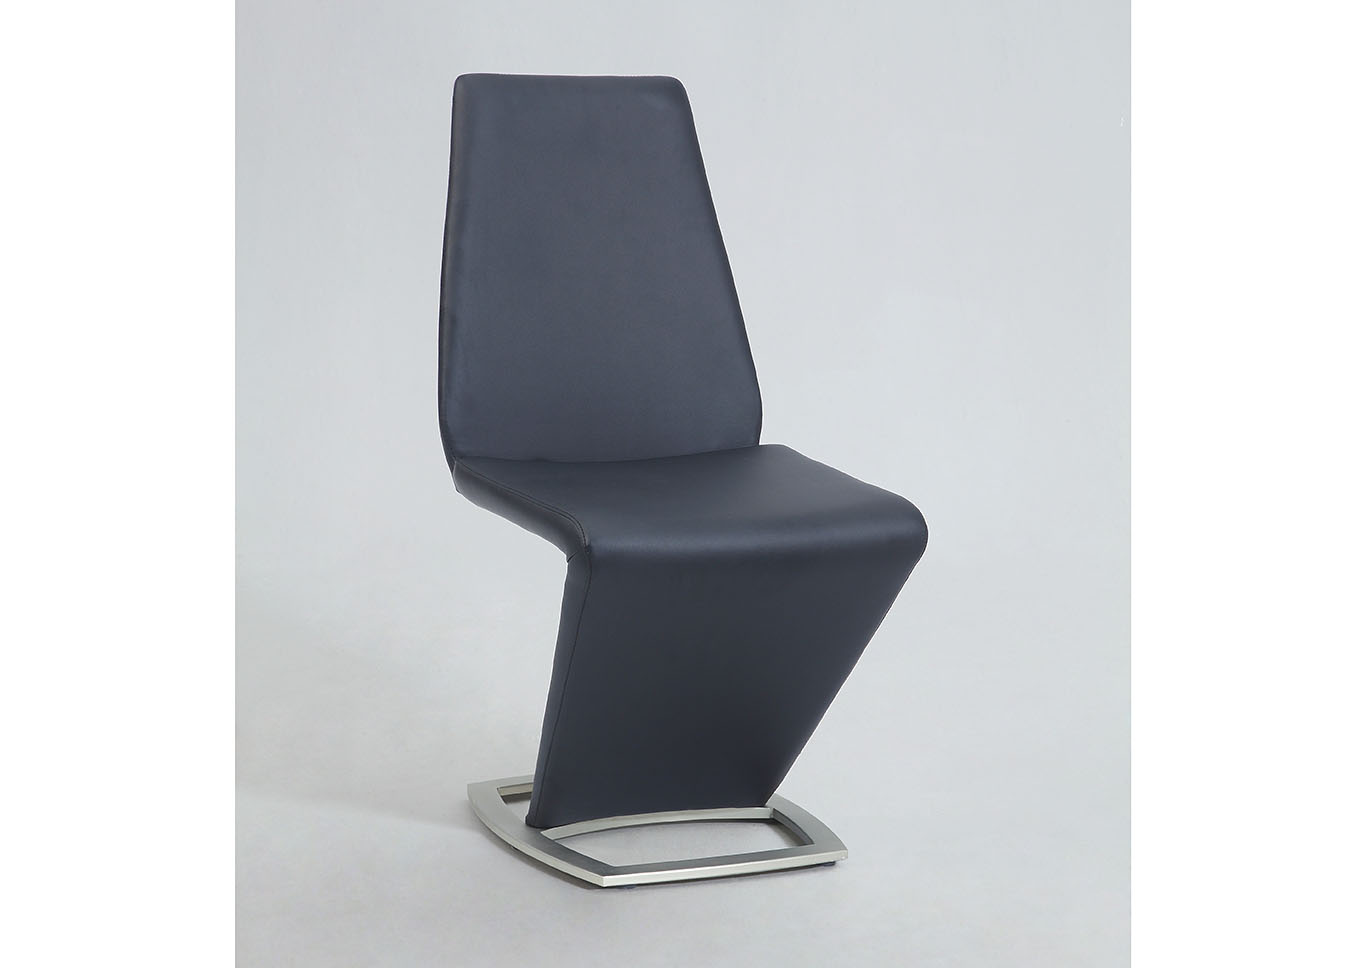 Abby Black "Z" Shaped Side Chair,Chintaly Imports